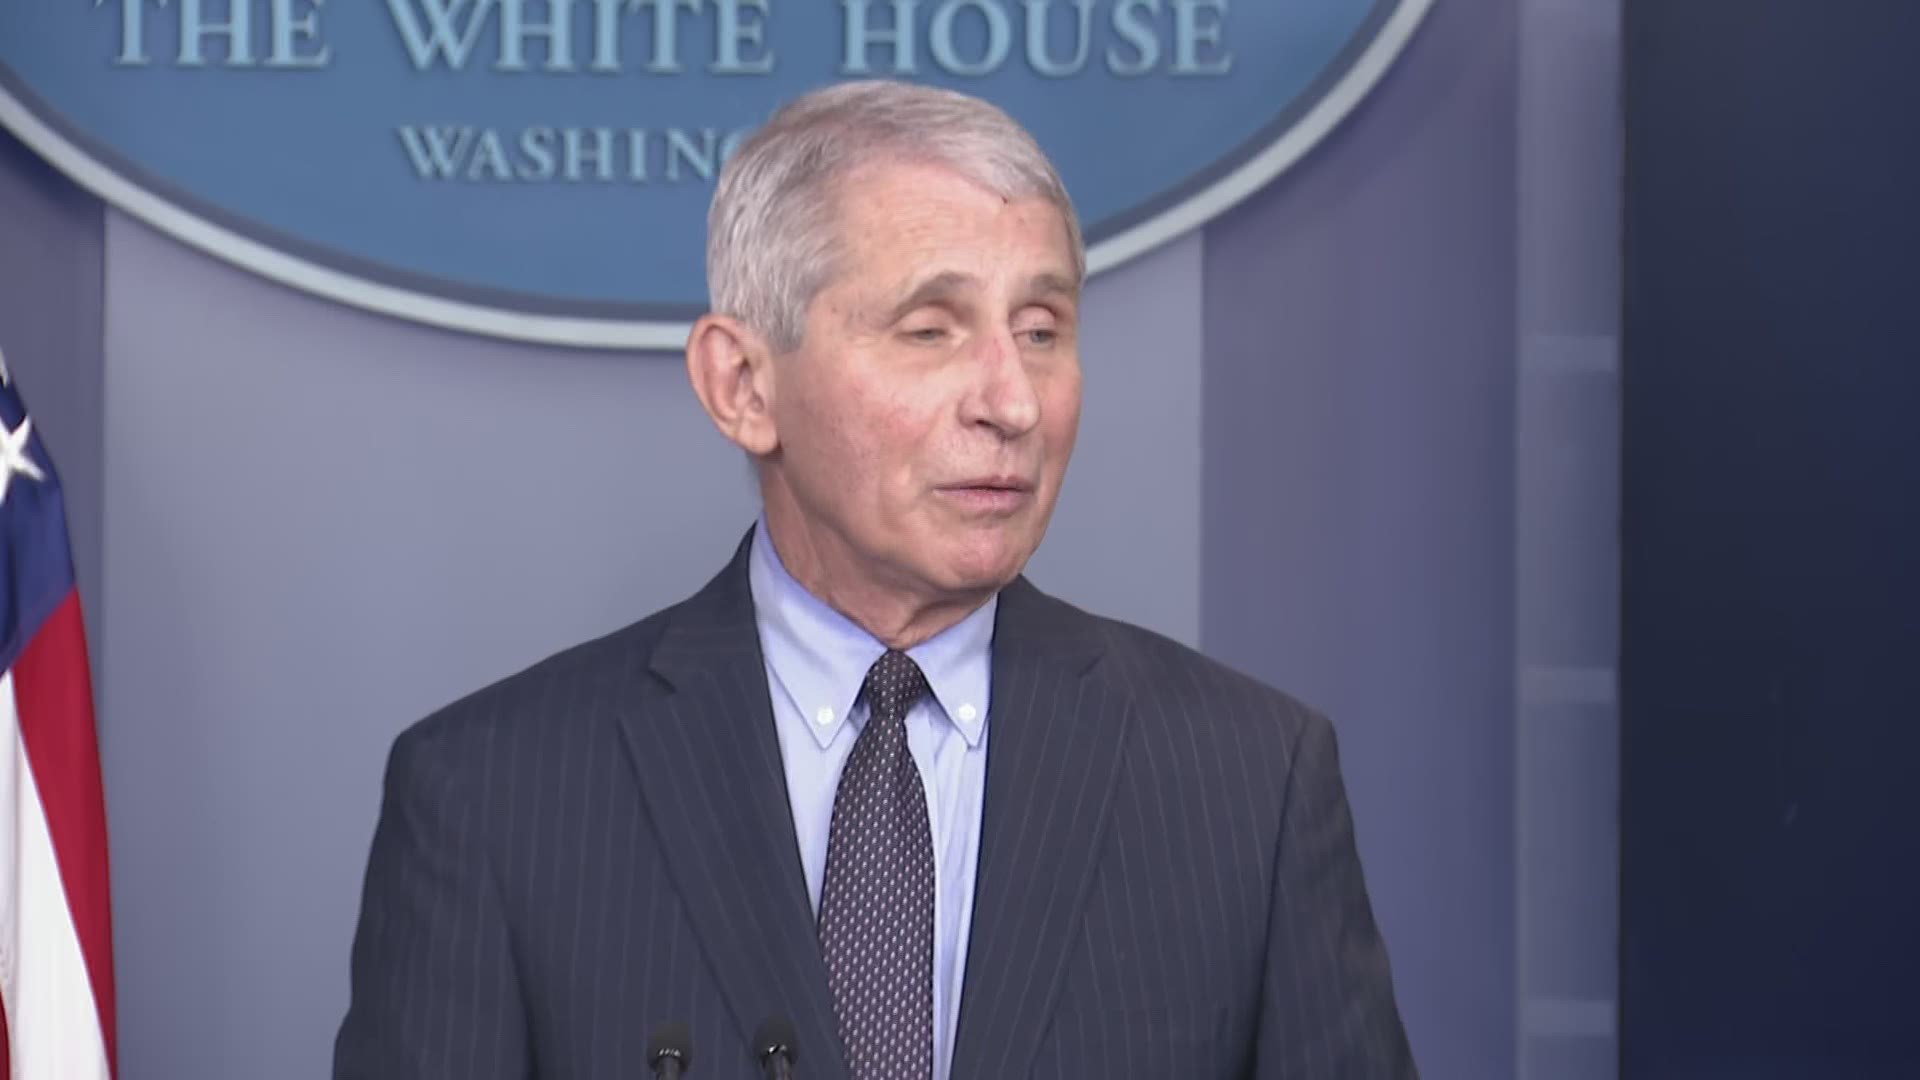 Dr. Anthony Fauci predicted that if 70 to 85% of Americans are vaccinated by mid to end of summer, there could be a 'degree of normality' in Fall 2021.